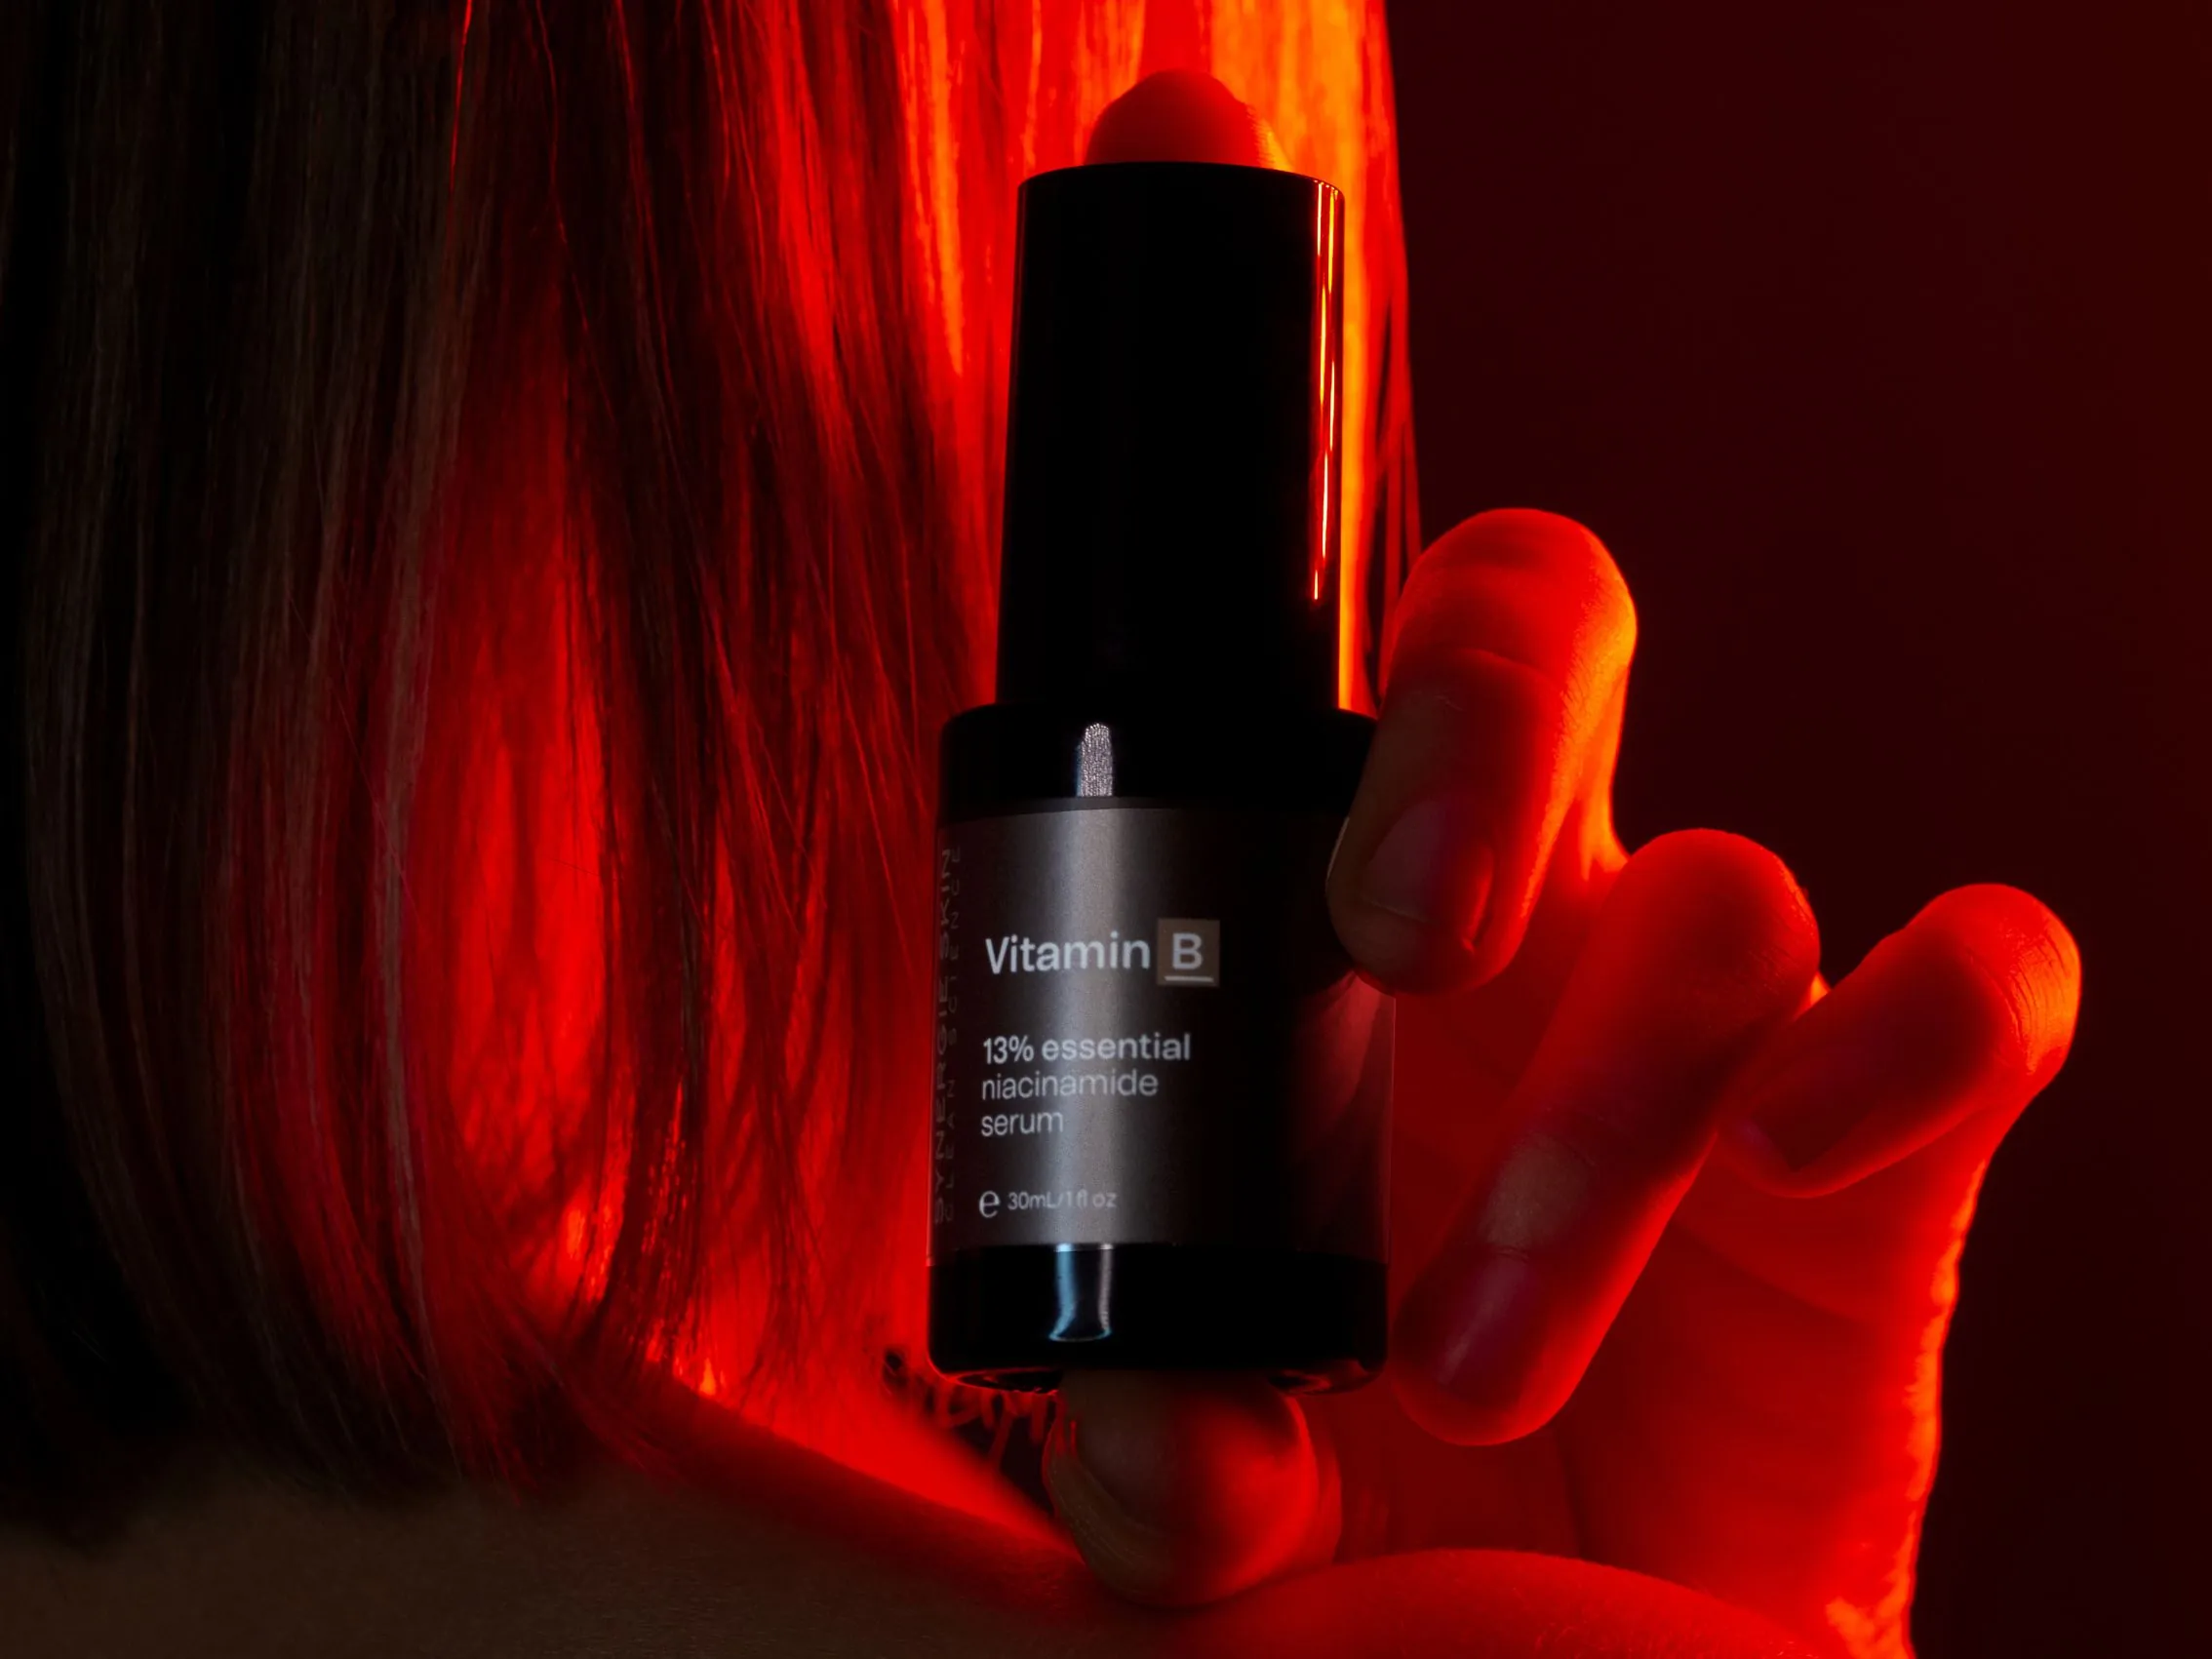 Synergie Skin Vitamin B & Red Light Therapy